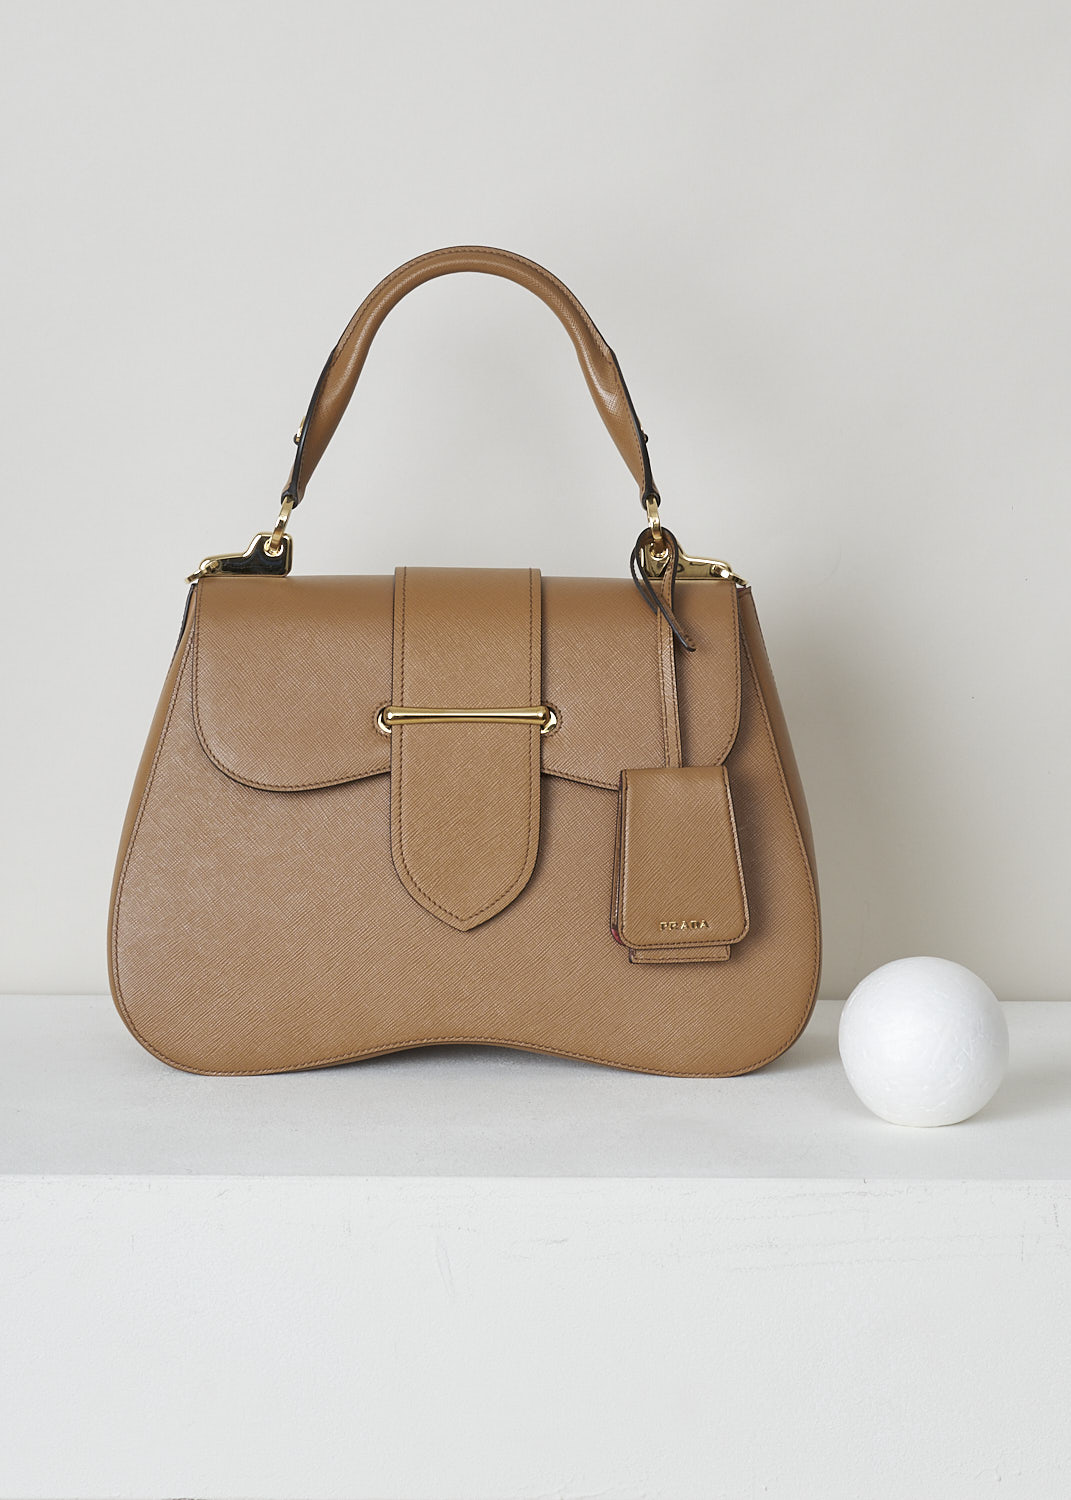 PRADA, CARAMEL BROWN SIDONIE TOP HANDLE BAG, CARTELLA_1BN002_F098L_CARAMEL, Brown, Front, This large caramel brown Sidonie Top Handle Bag is made with Saffiano leather. The bag comes with a leather handle and an adjustable and detachable shoulder strap. The bag has gold-tone metal hardware with the brand's logo on the back. The removable leather keychain has that same gold-tone logo on it. The slip-through closure opens up to reveal its red interior. The bag has a single, spacious compartment with a zipped inner pocket to one side and a patch pocket on the other side.   
